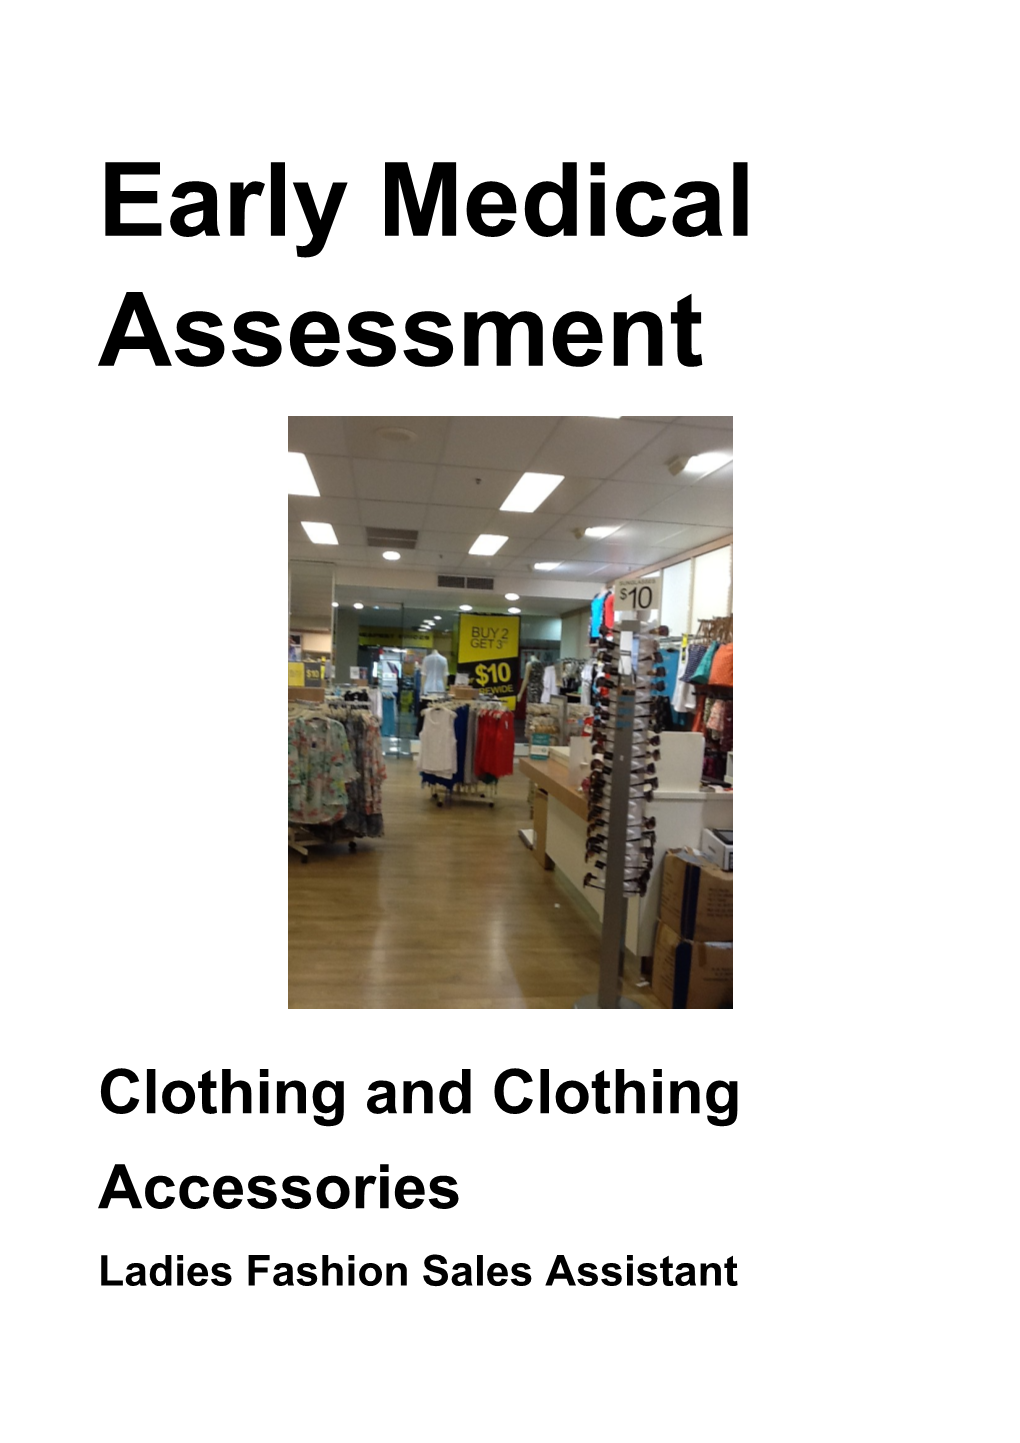 Clothing and Clothing Accessories Retailing - Sales Assistant - Ladies Fashion